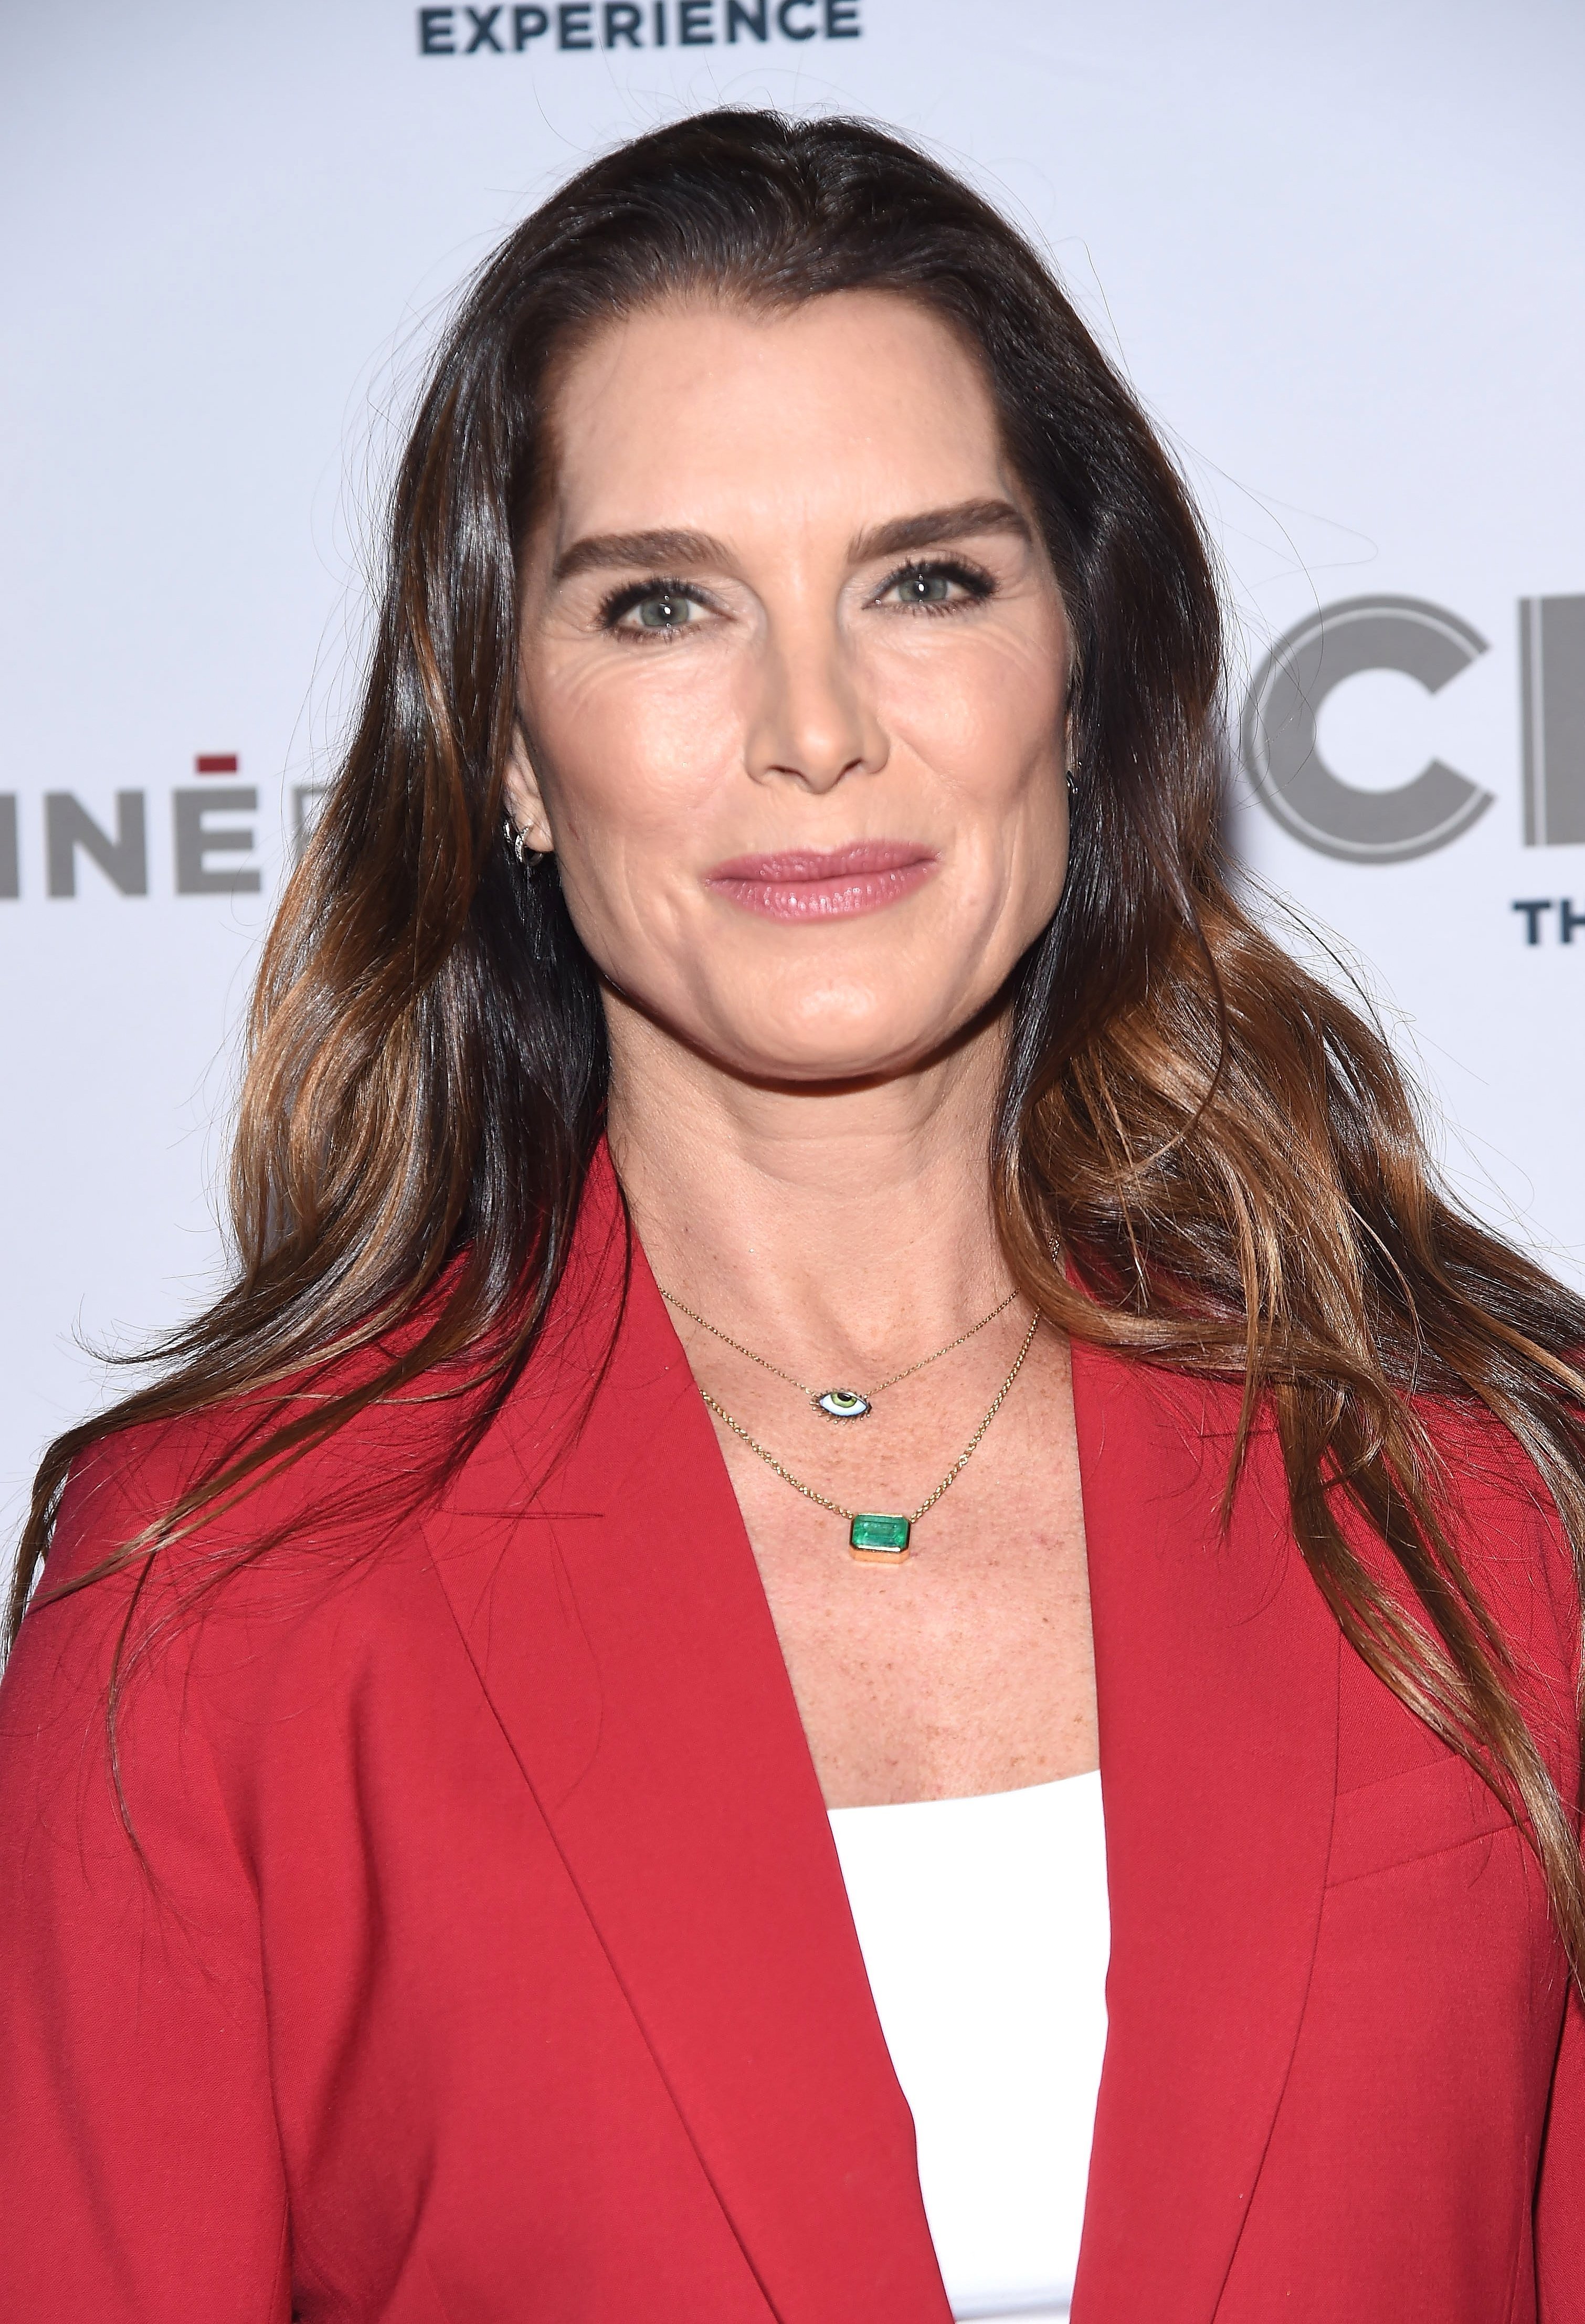 Brooke Shields attends the opening of CMX CineBistro in New York City on November 7, 2018 | Photo: Getty Images